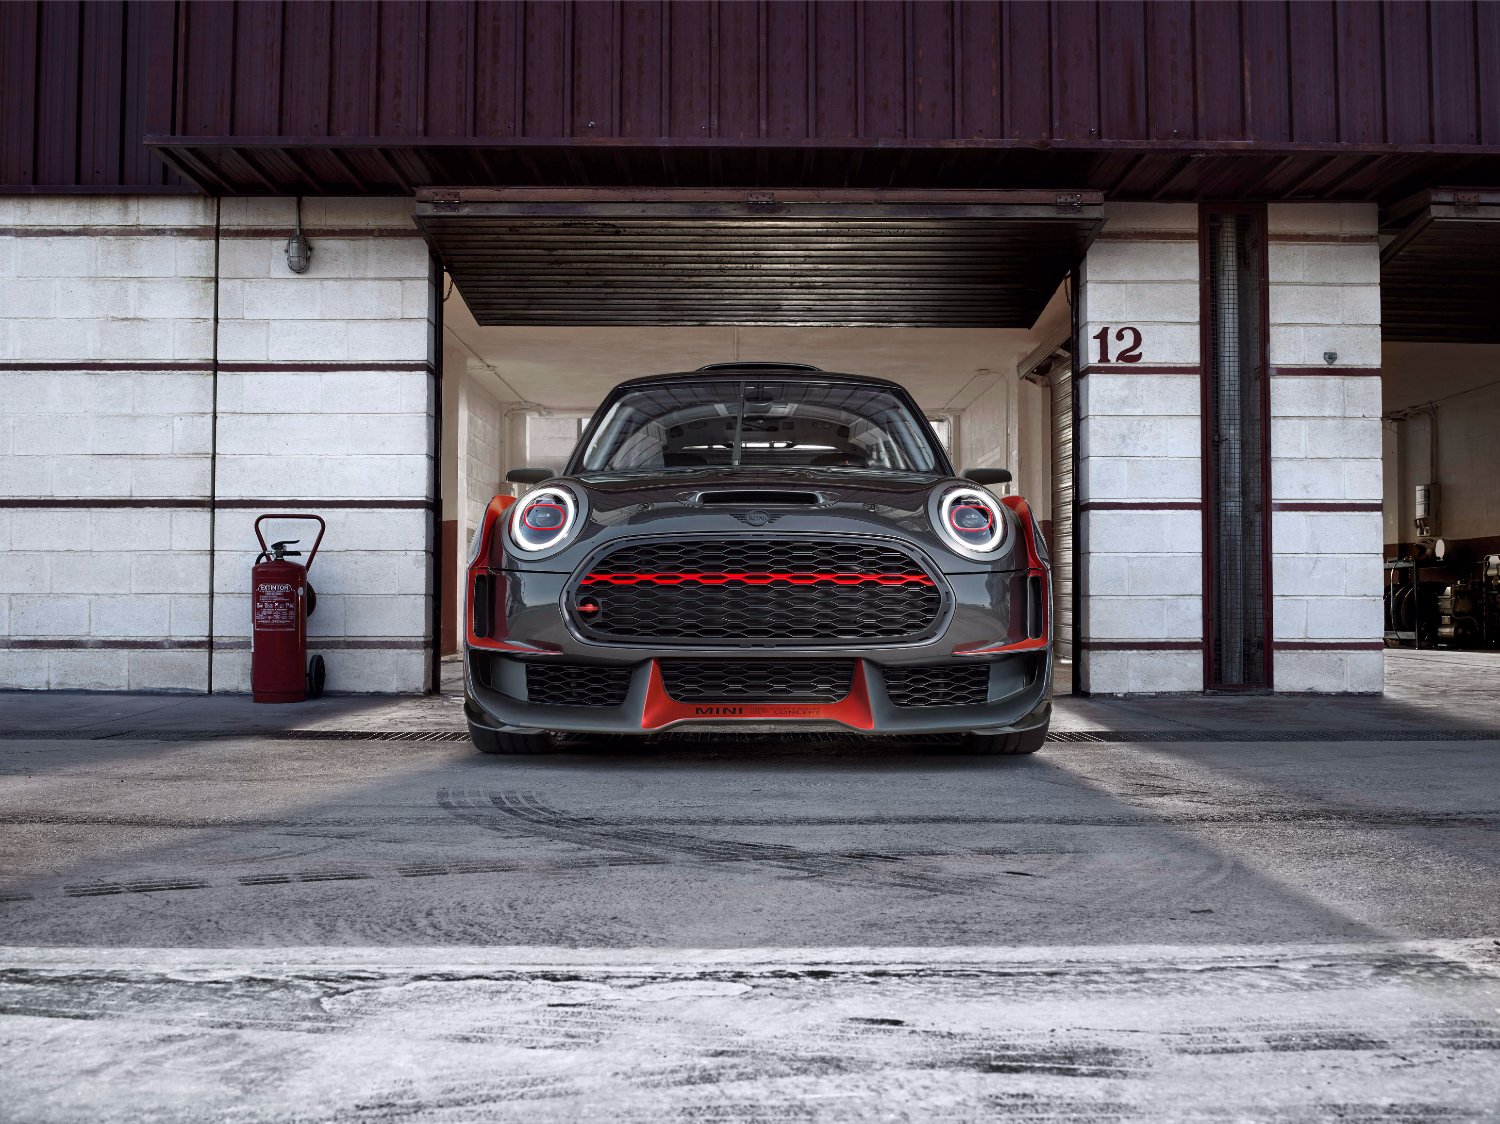 The MINI John Cooper Works GP Concept: Racing without compromise. MINI presents design study at the IAA Cars 2017.